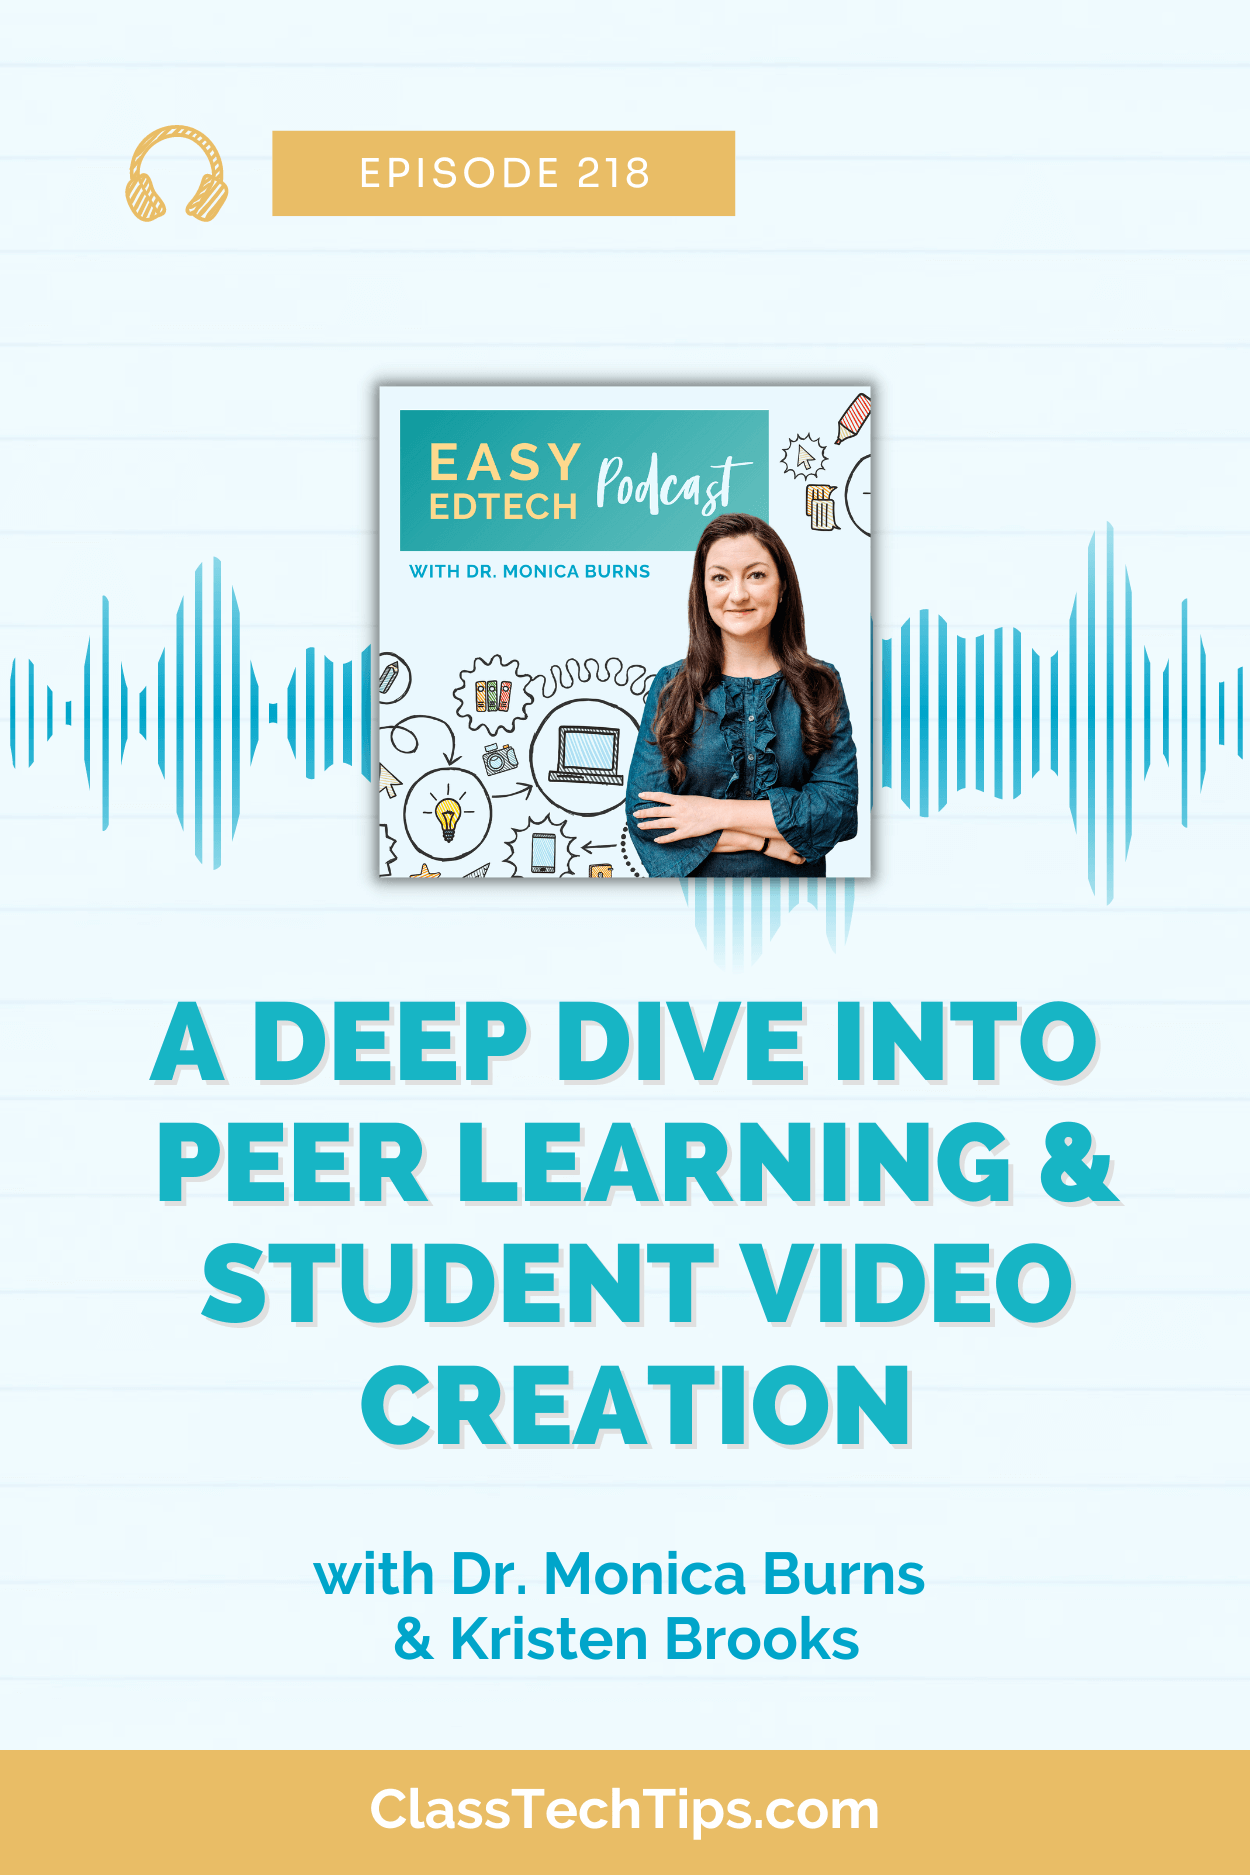 The podcast's logo is shown with a backdrop of pulsating blue soundwaves, indicating the audio medium of the podcast. The episode title 'A Deep Dive into Peer Learning and Student Video Creation' is displayed, suggesting an exploration of modern collaborative learning strategies and multimedia skills in education.